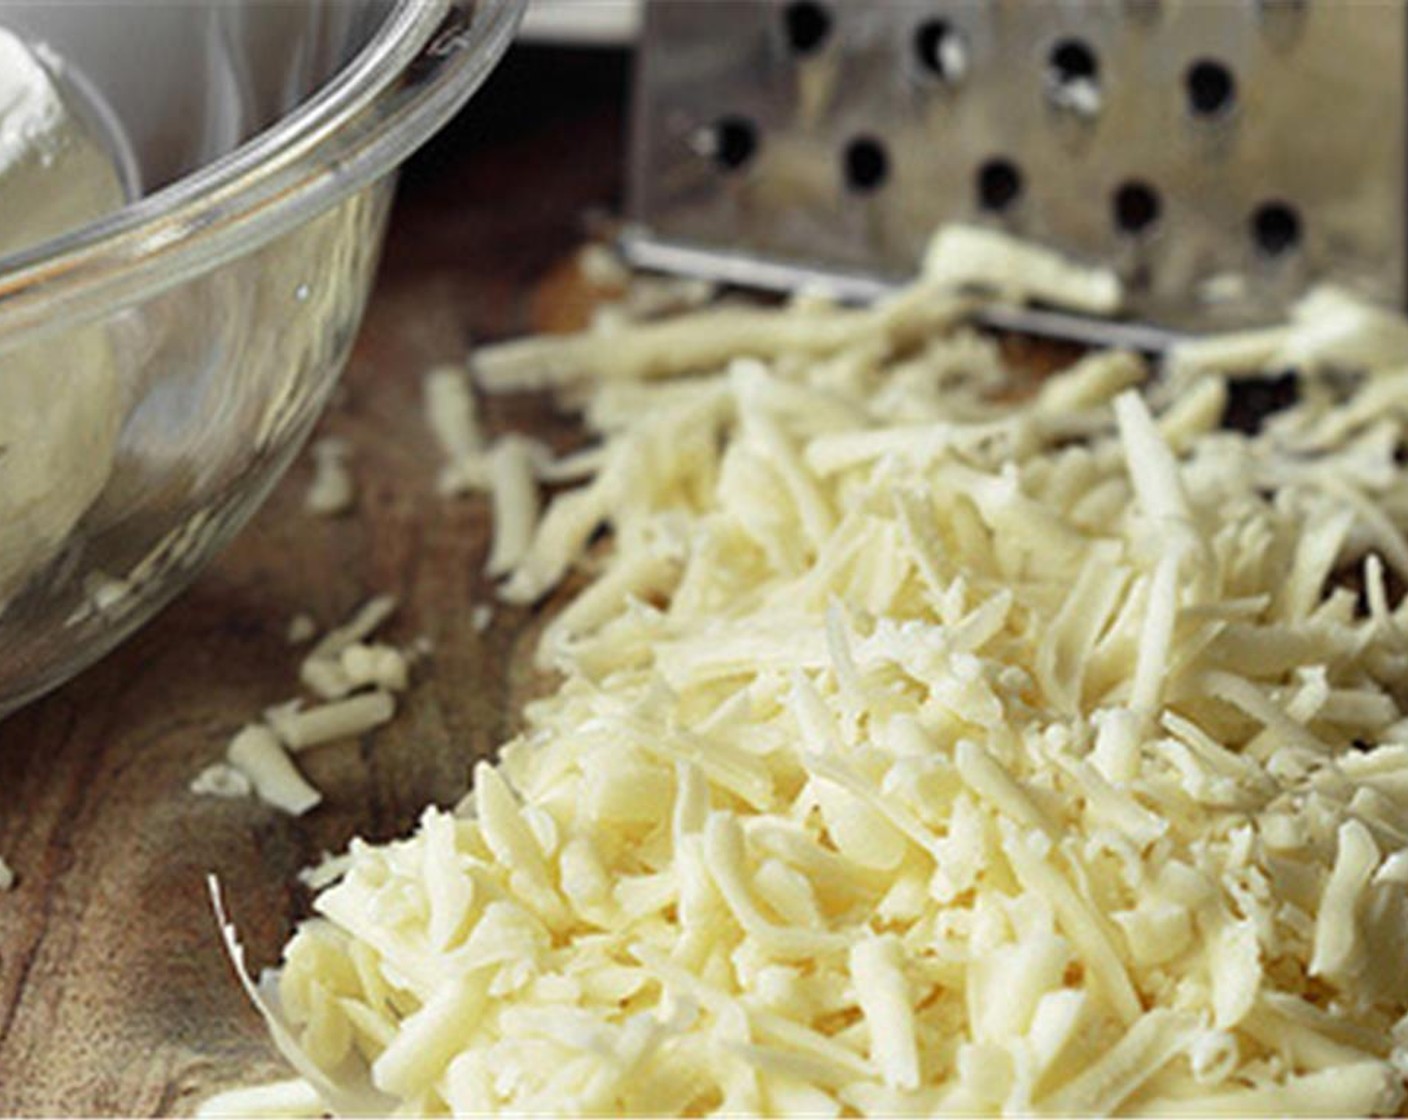 step 2 Shred the Monterey Jack Cheese (1 cup). Crumble the Queso Fresco (1/4 cup). Soften the Cream Cheese (1 cup). Chop the Yellow Onion (1) and Garlic (2 cloves).